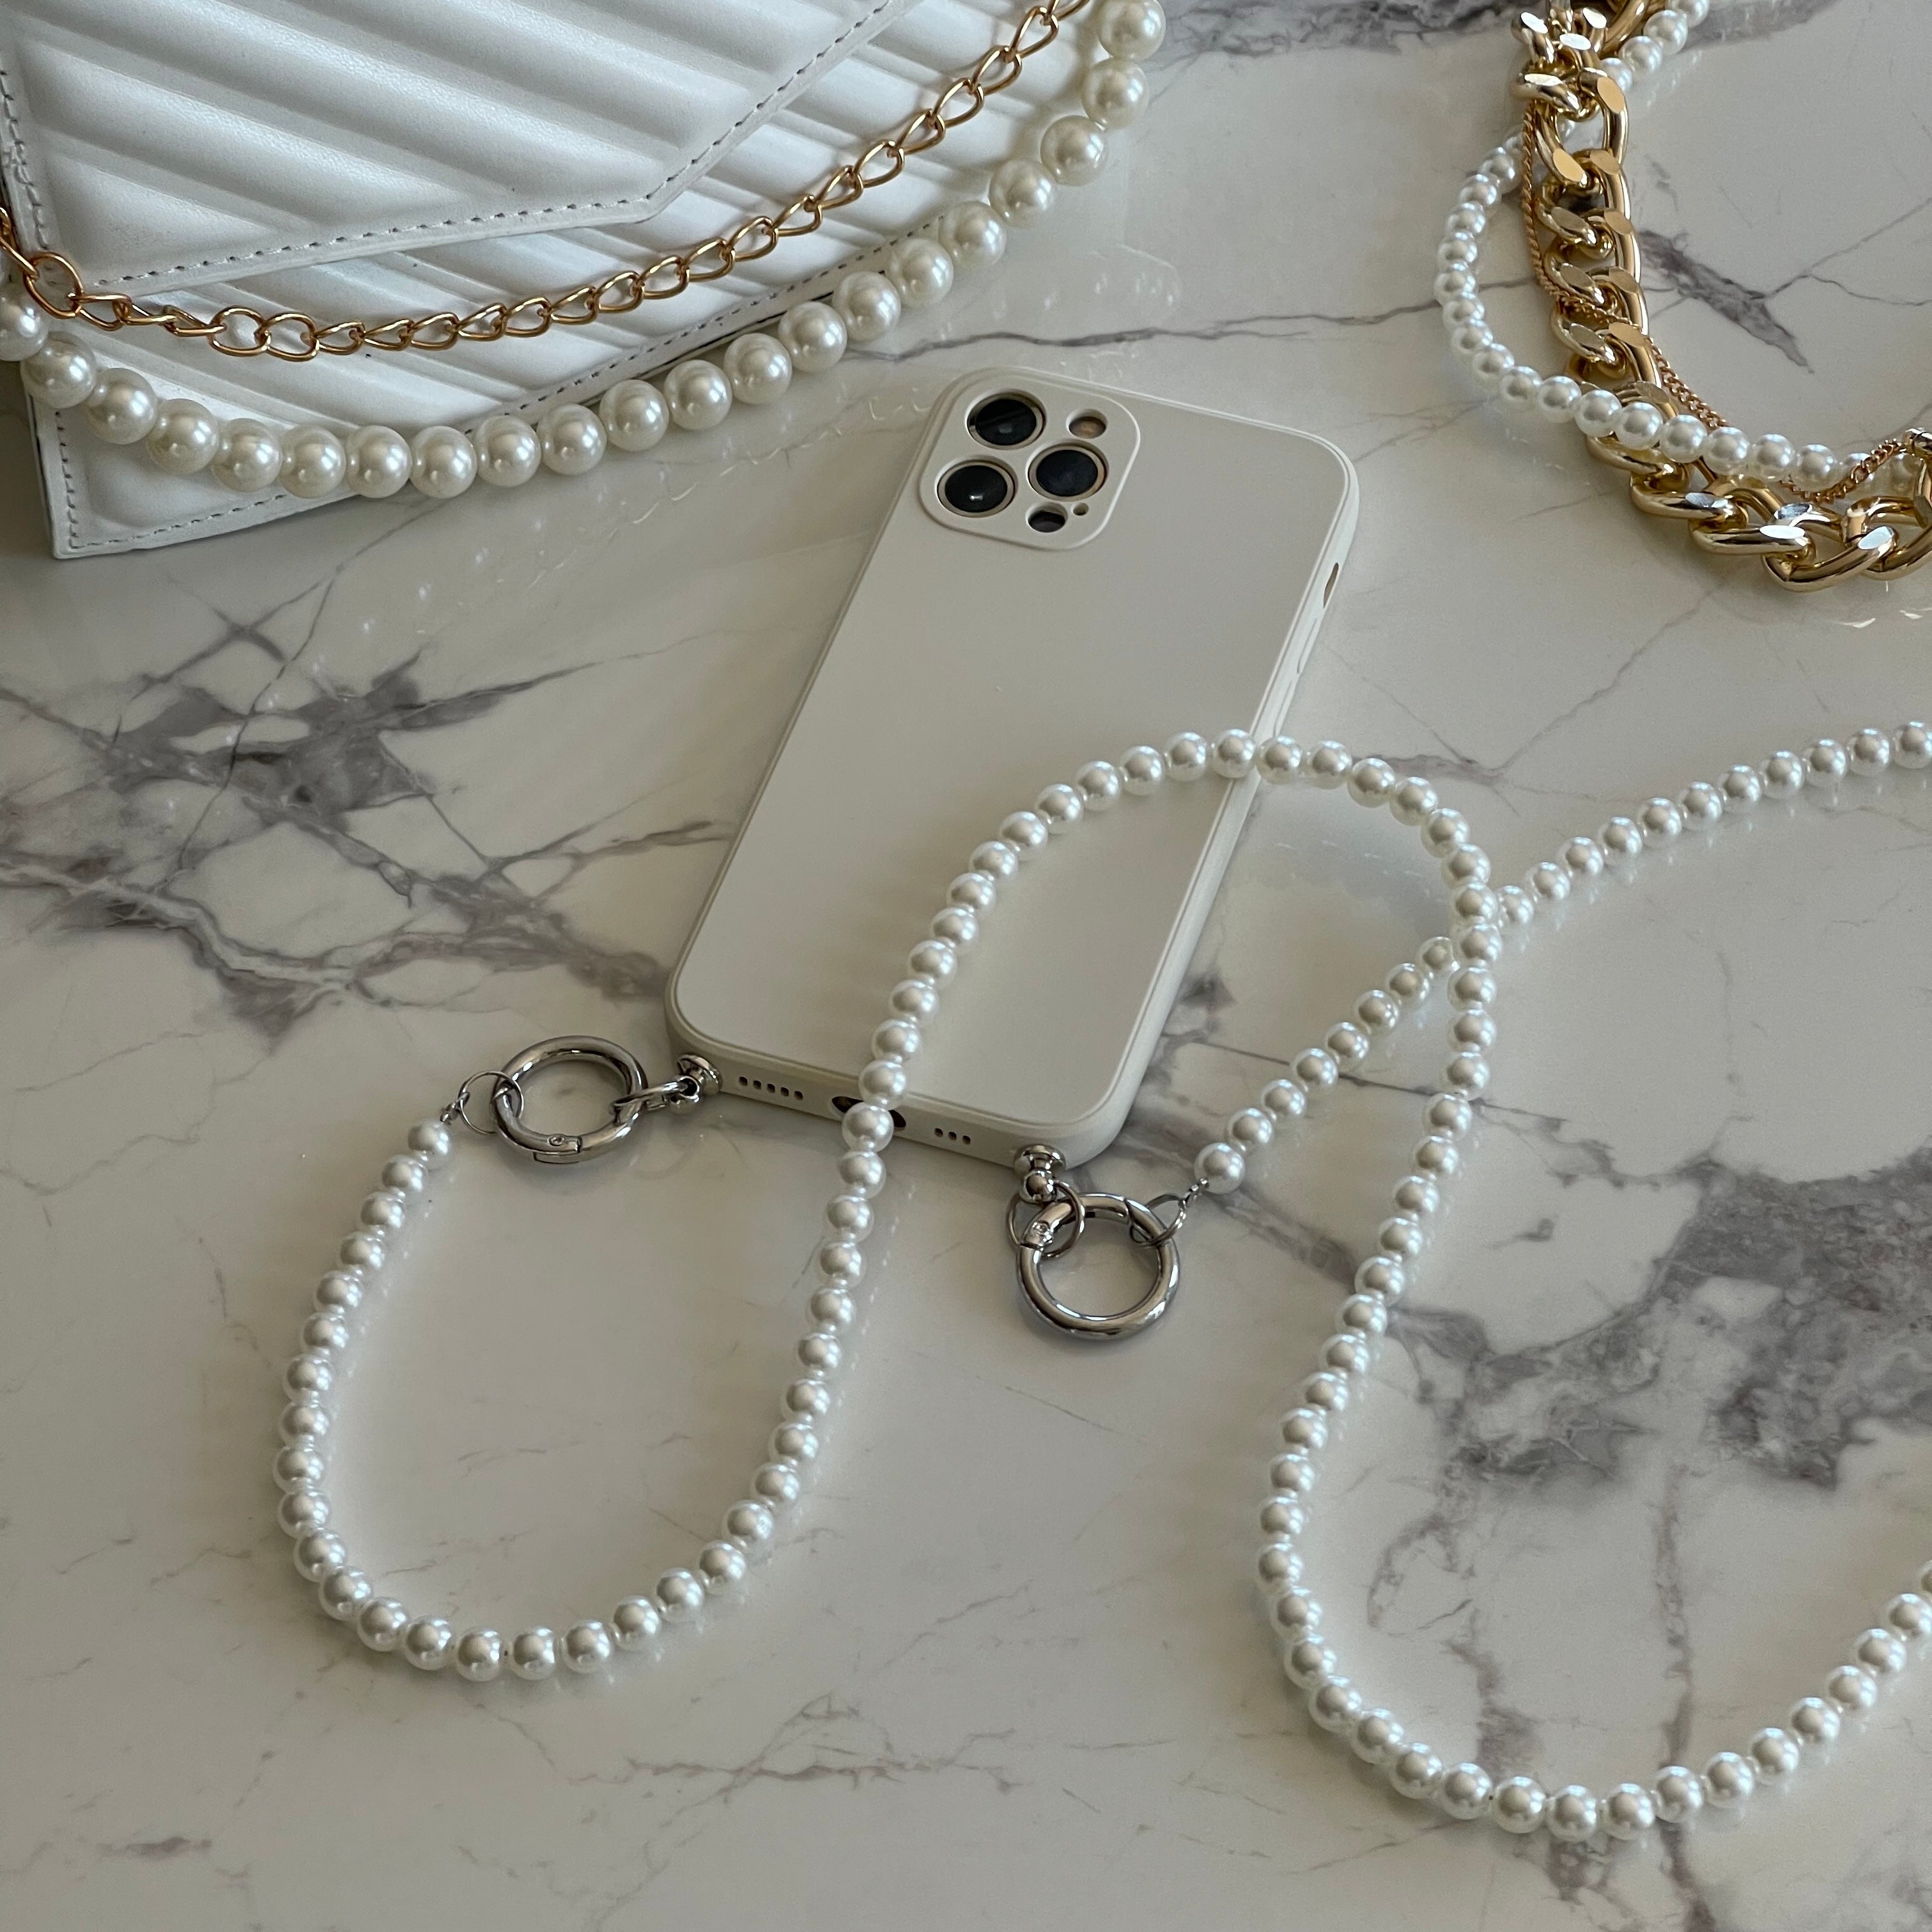 iPhone Case With Pearls Lanyard